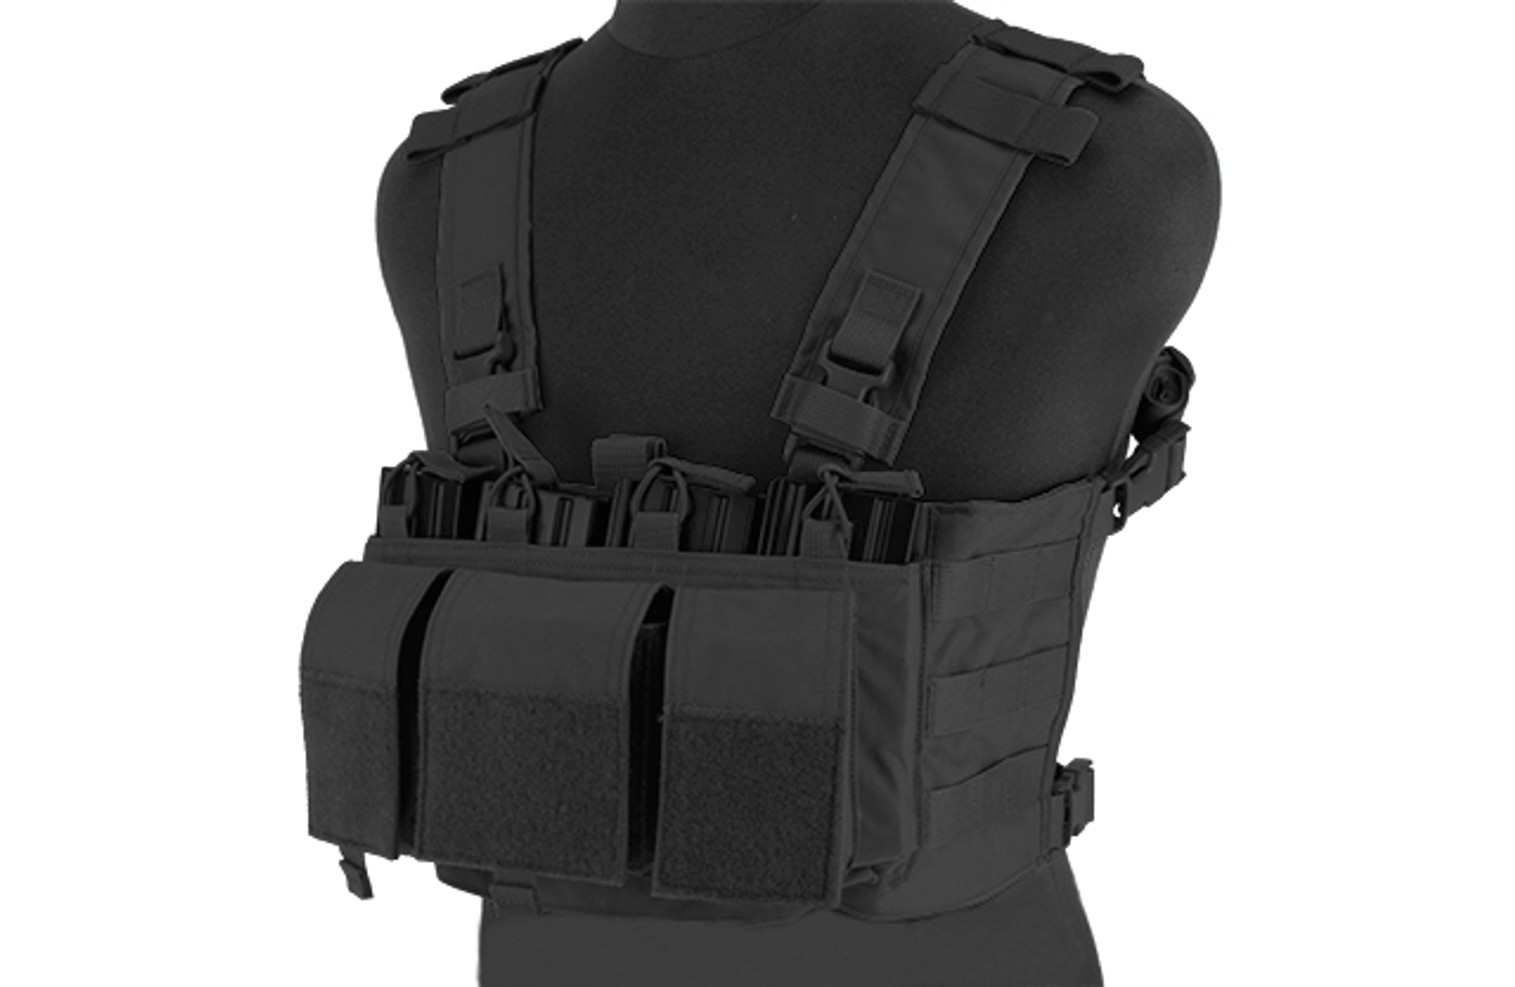 Mayflower Research and Consulting 5.56 Hybrid Chest Rig - Black